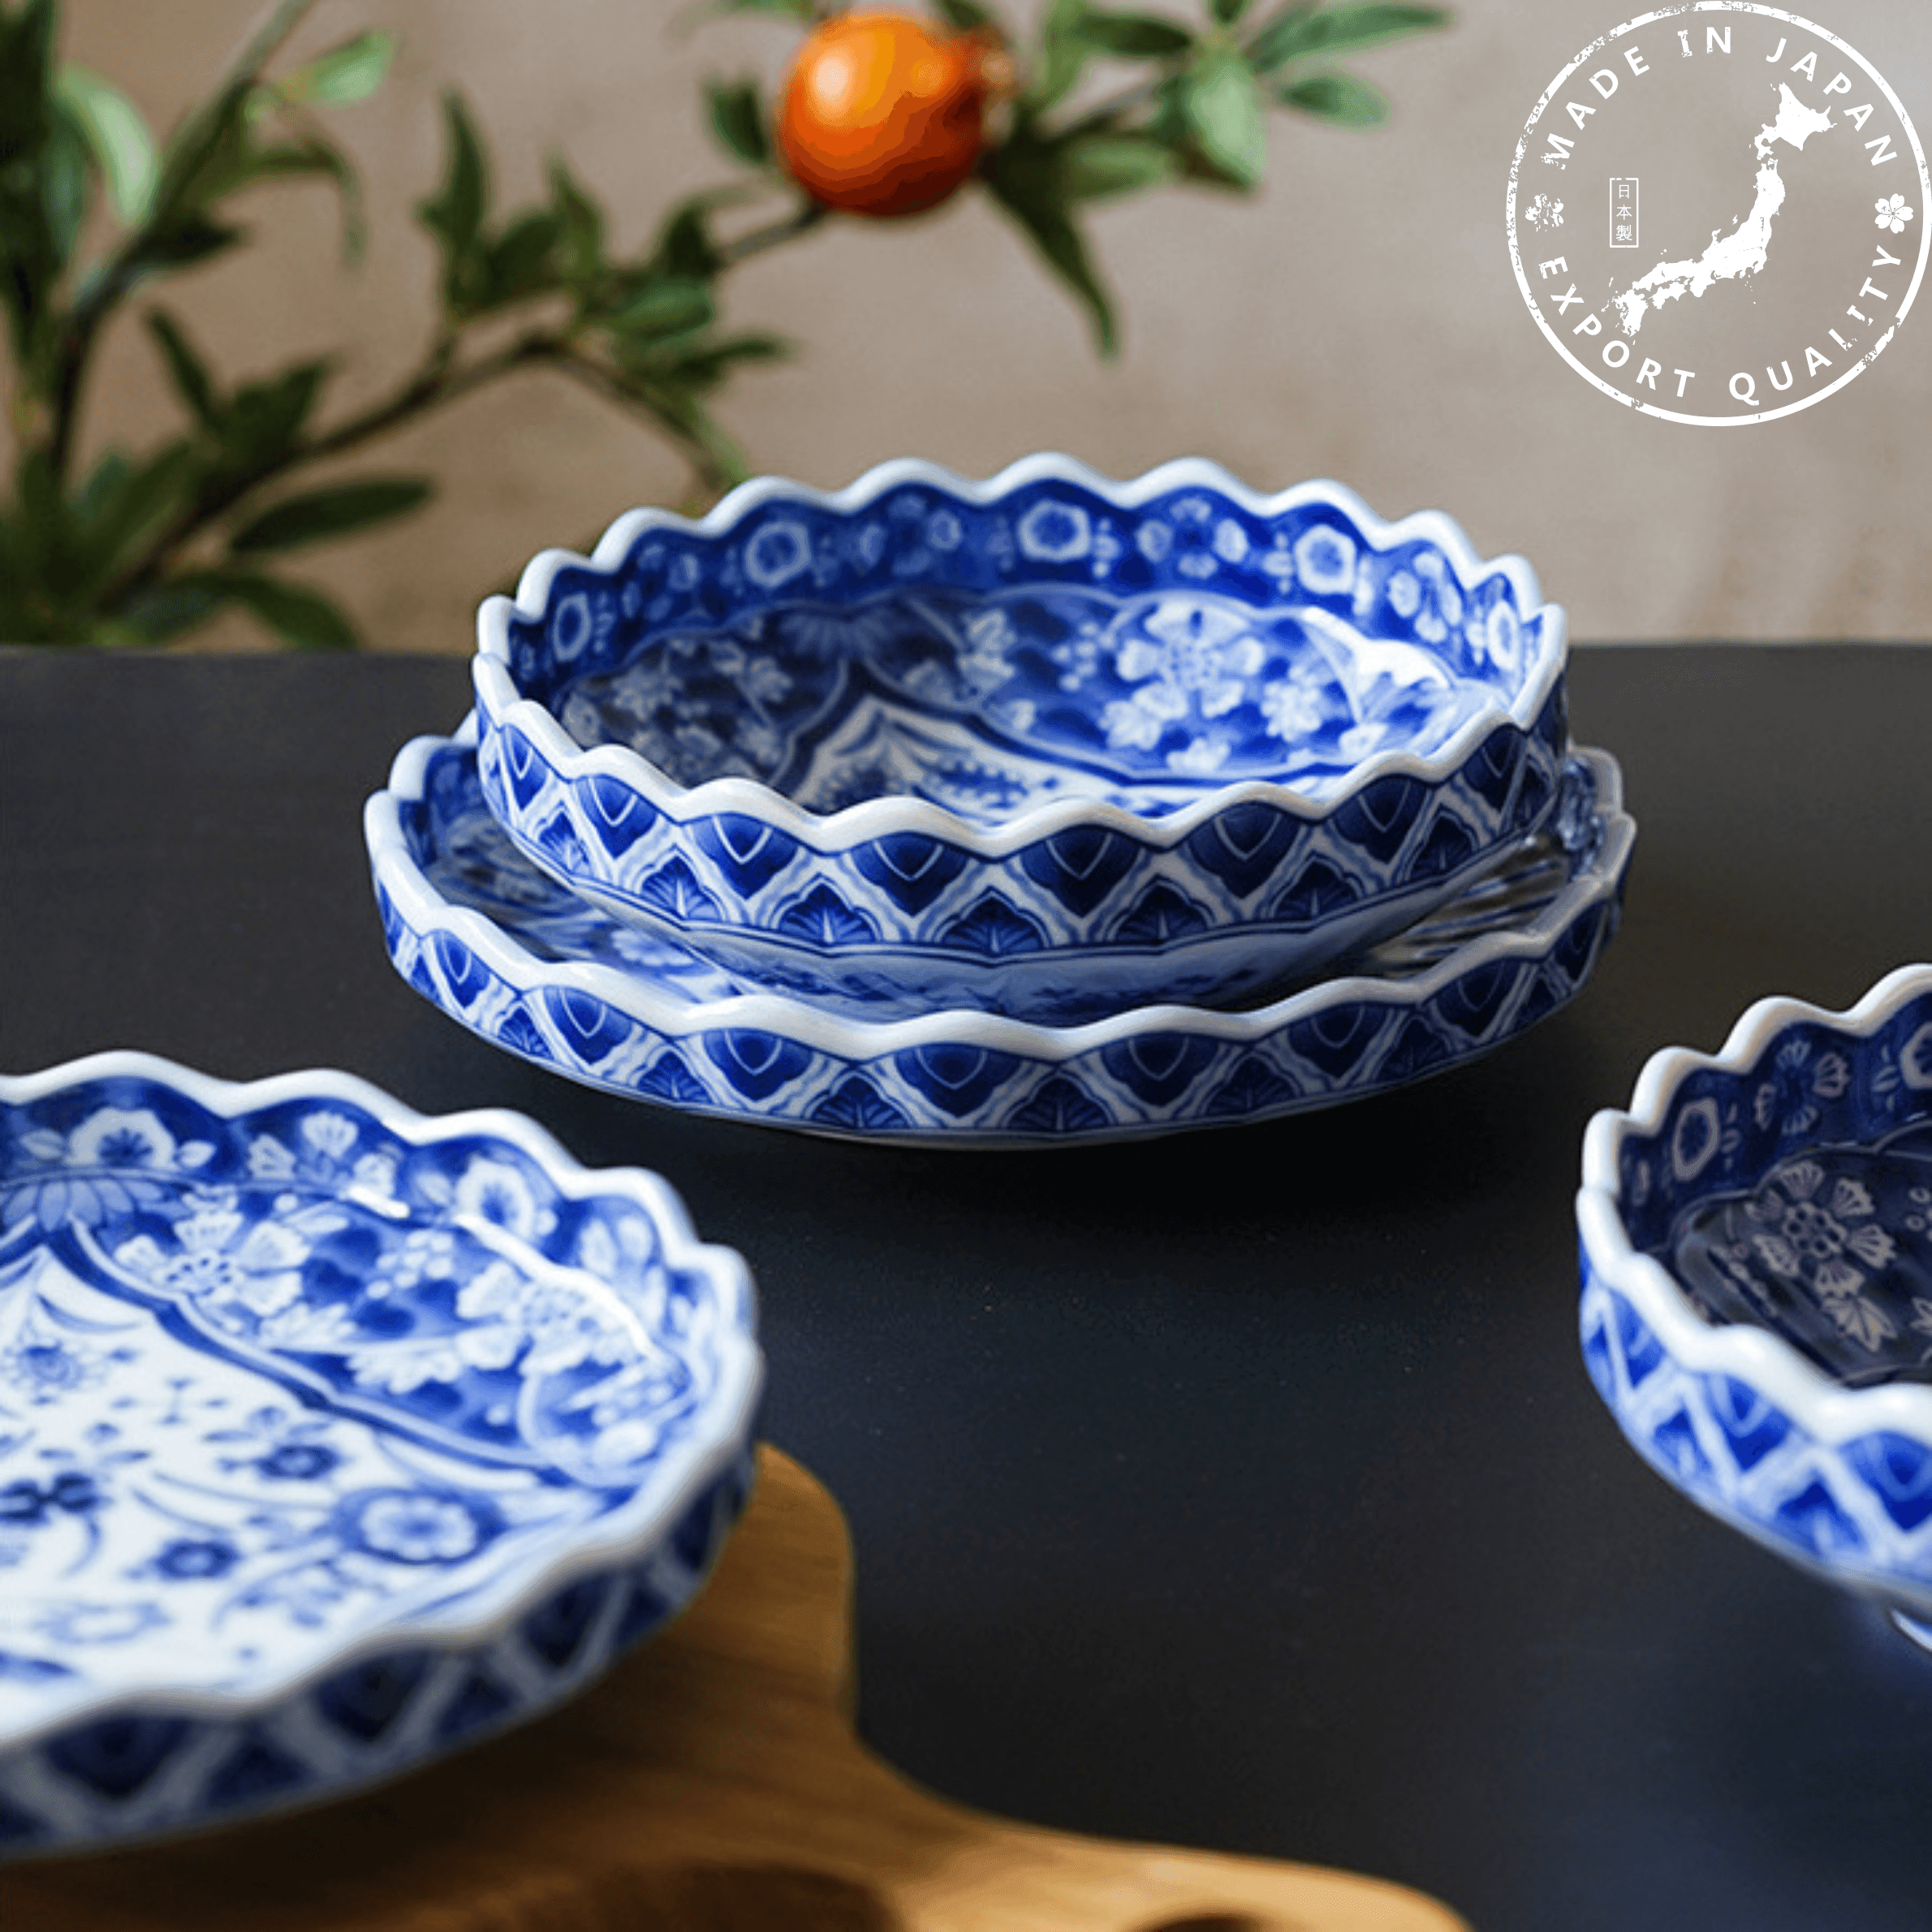 Japanese Handcrafted Ceramic Blue and White Decorated Plates/Bowls - MASU